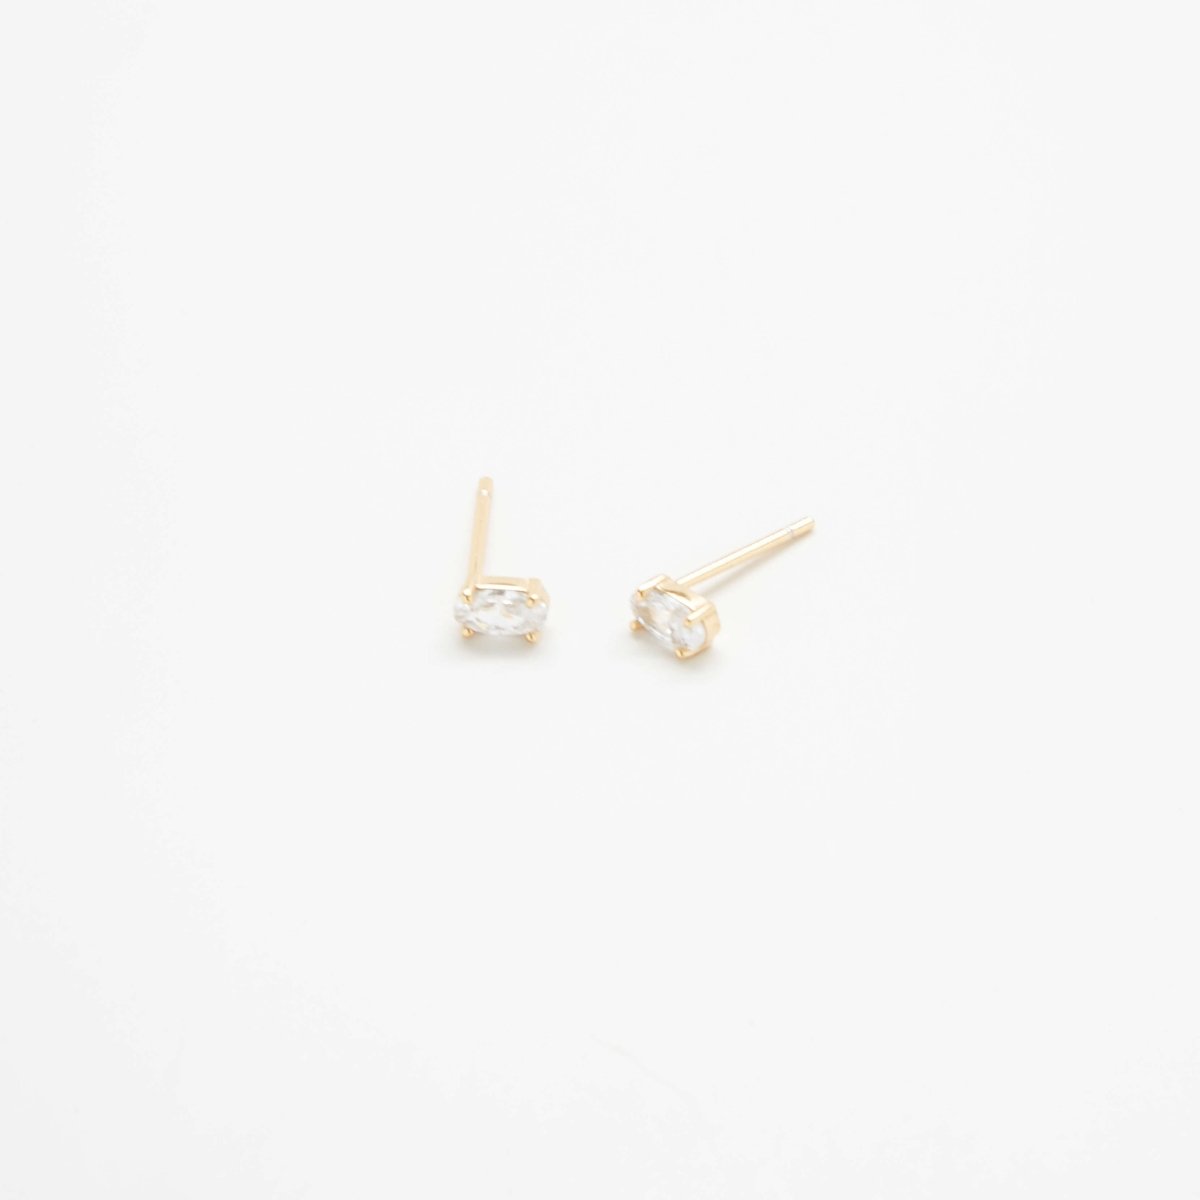 White CZ Oval Stud Earrings - Admiral Row